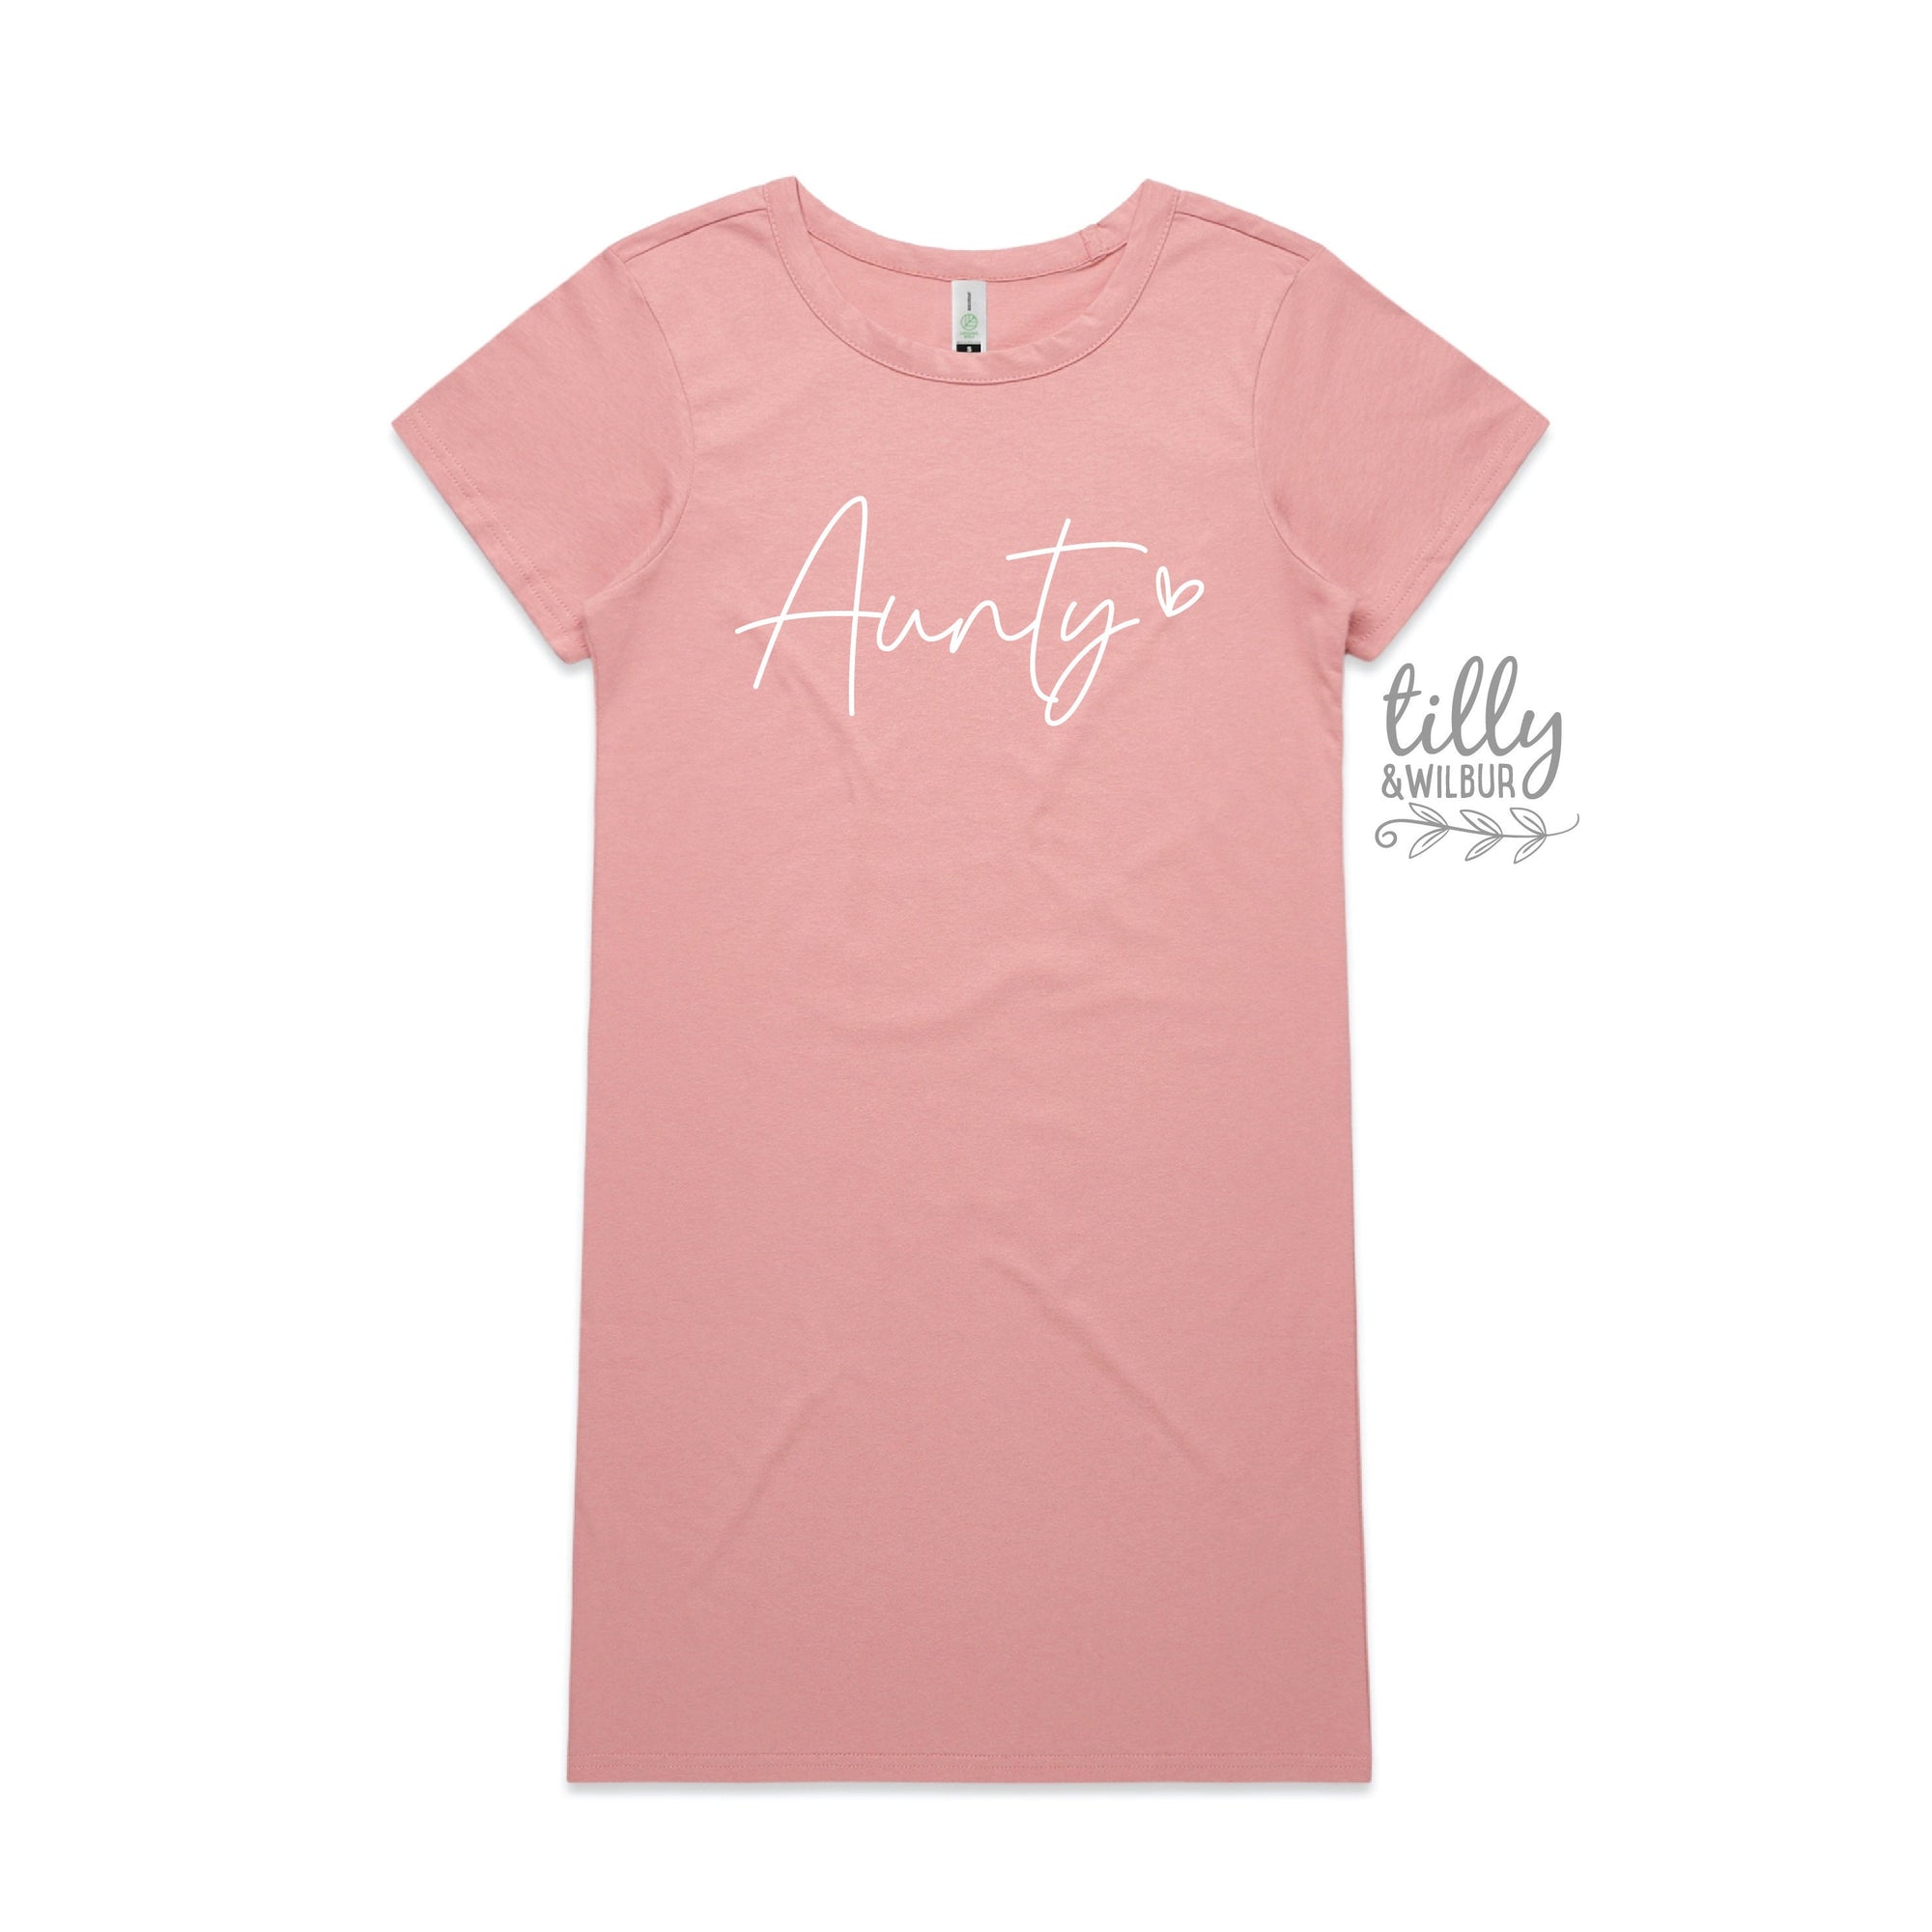 Aunty T-Shirt Dress, Pregnancy Announcement T-Shirt, I'm Going To Be An Aunty, Baby Shower Gift, Aunty, Auntie, Sister Gift, Women's Dress